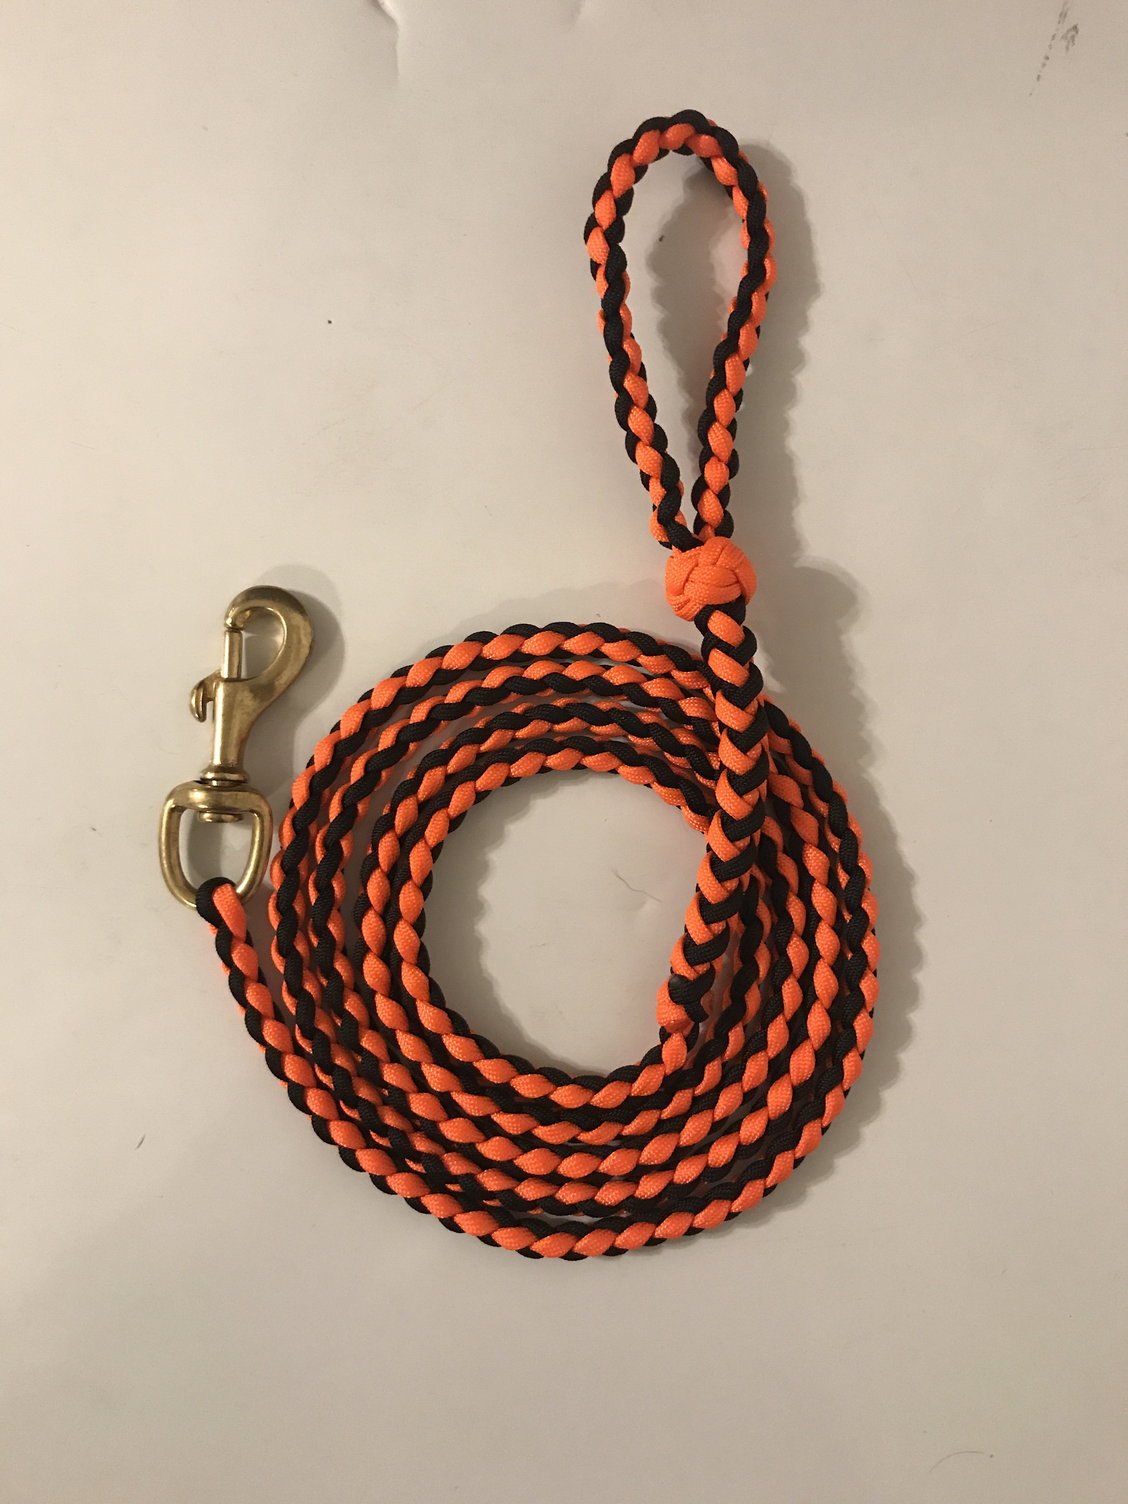 Offshore rod and reel leashes - The Hull Truth - Boating and Fishing Forum